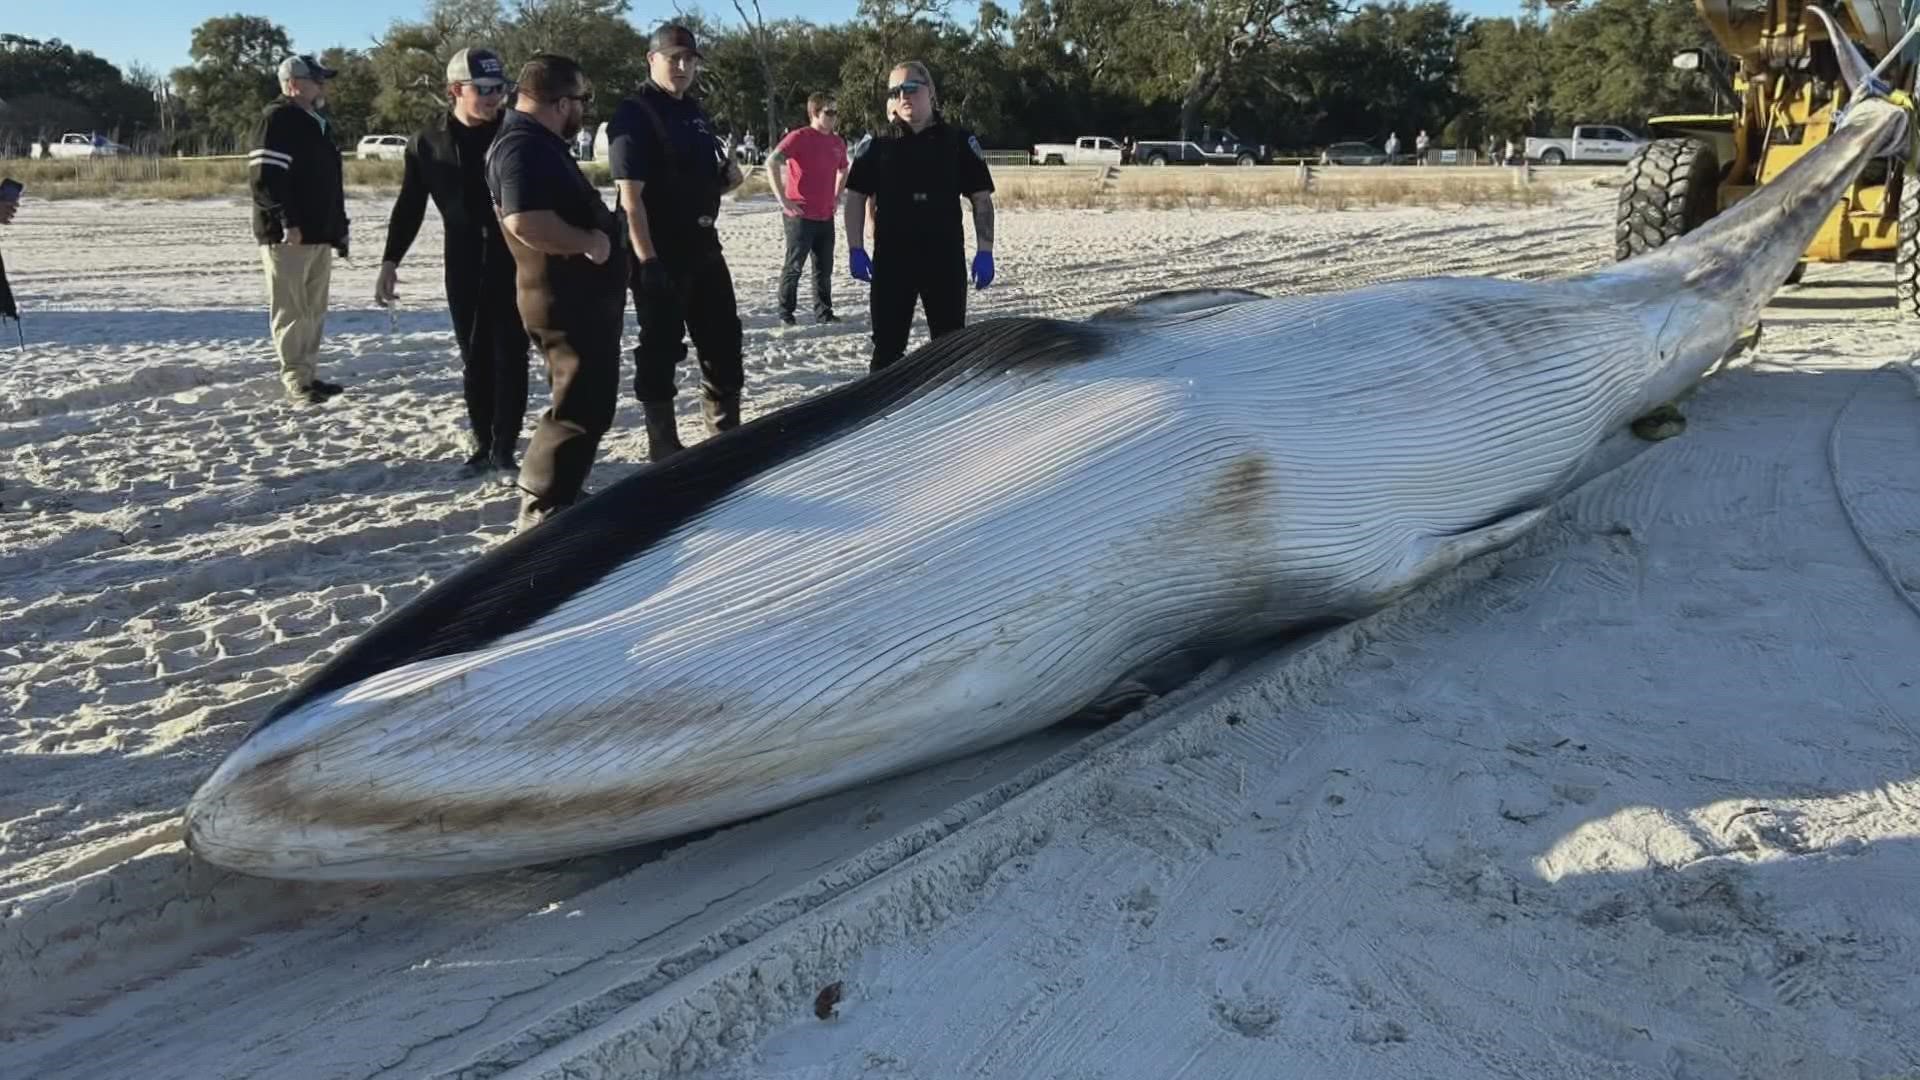 “They live in the wild. Only two or three have ever been recovered in the Gulf,” said President and Executive Director of IMMS Dr. Moby Solangi.